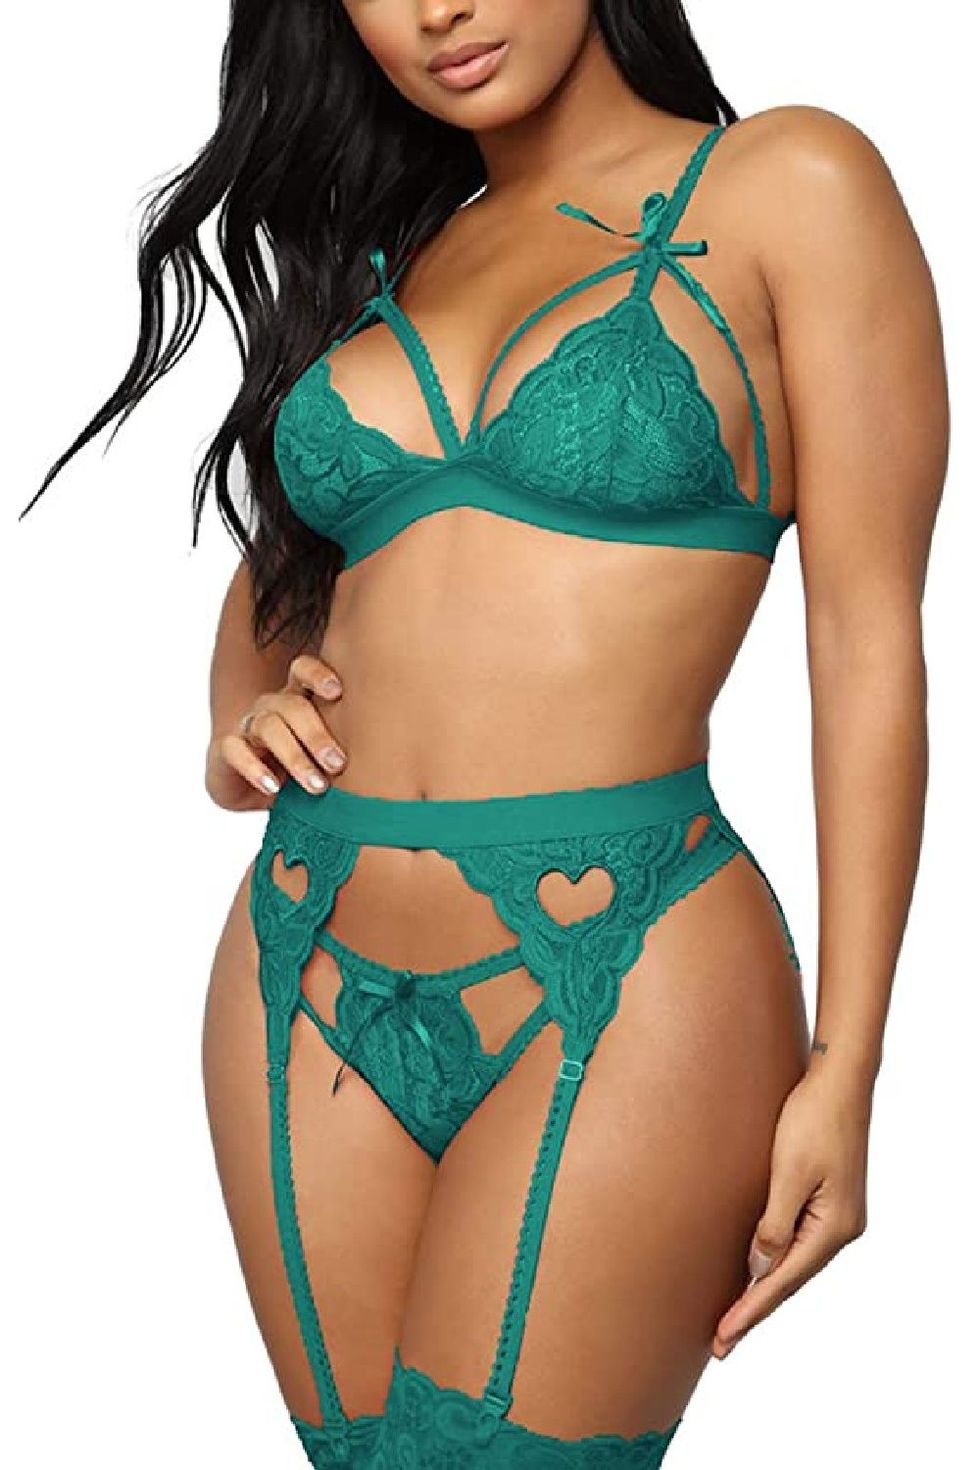 Women Lingerie Set for Sex Naughty Play 2 Piece Florlal Lace